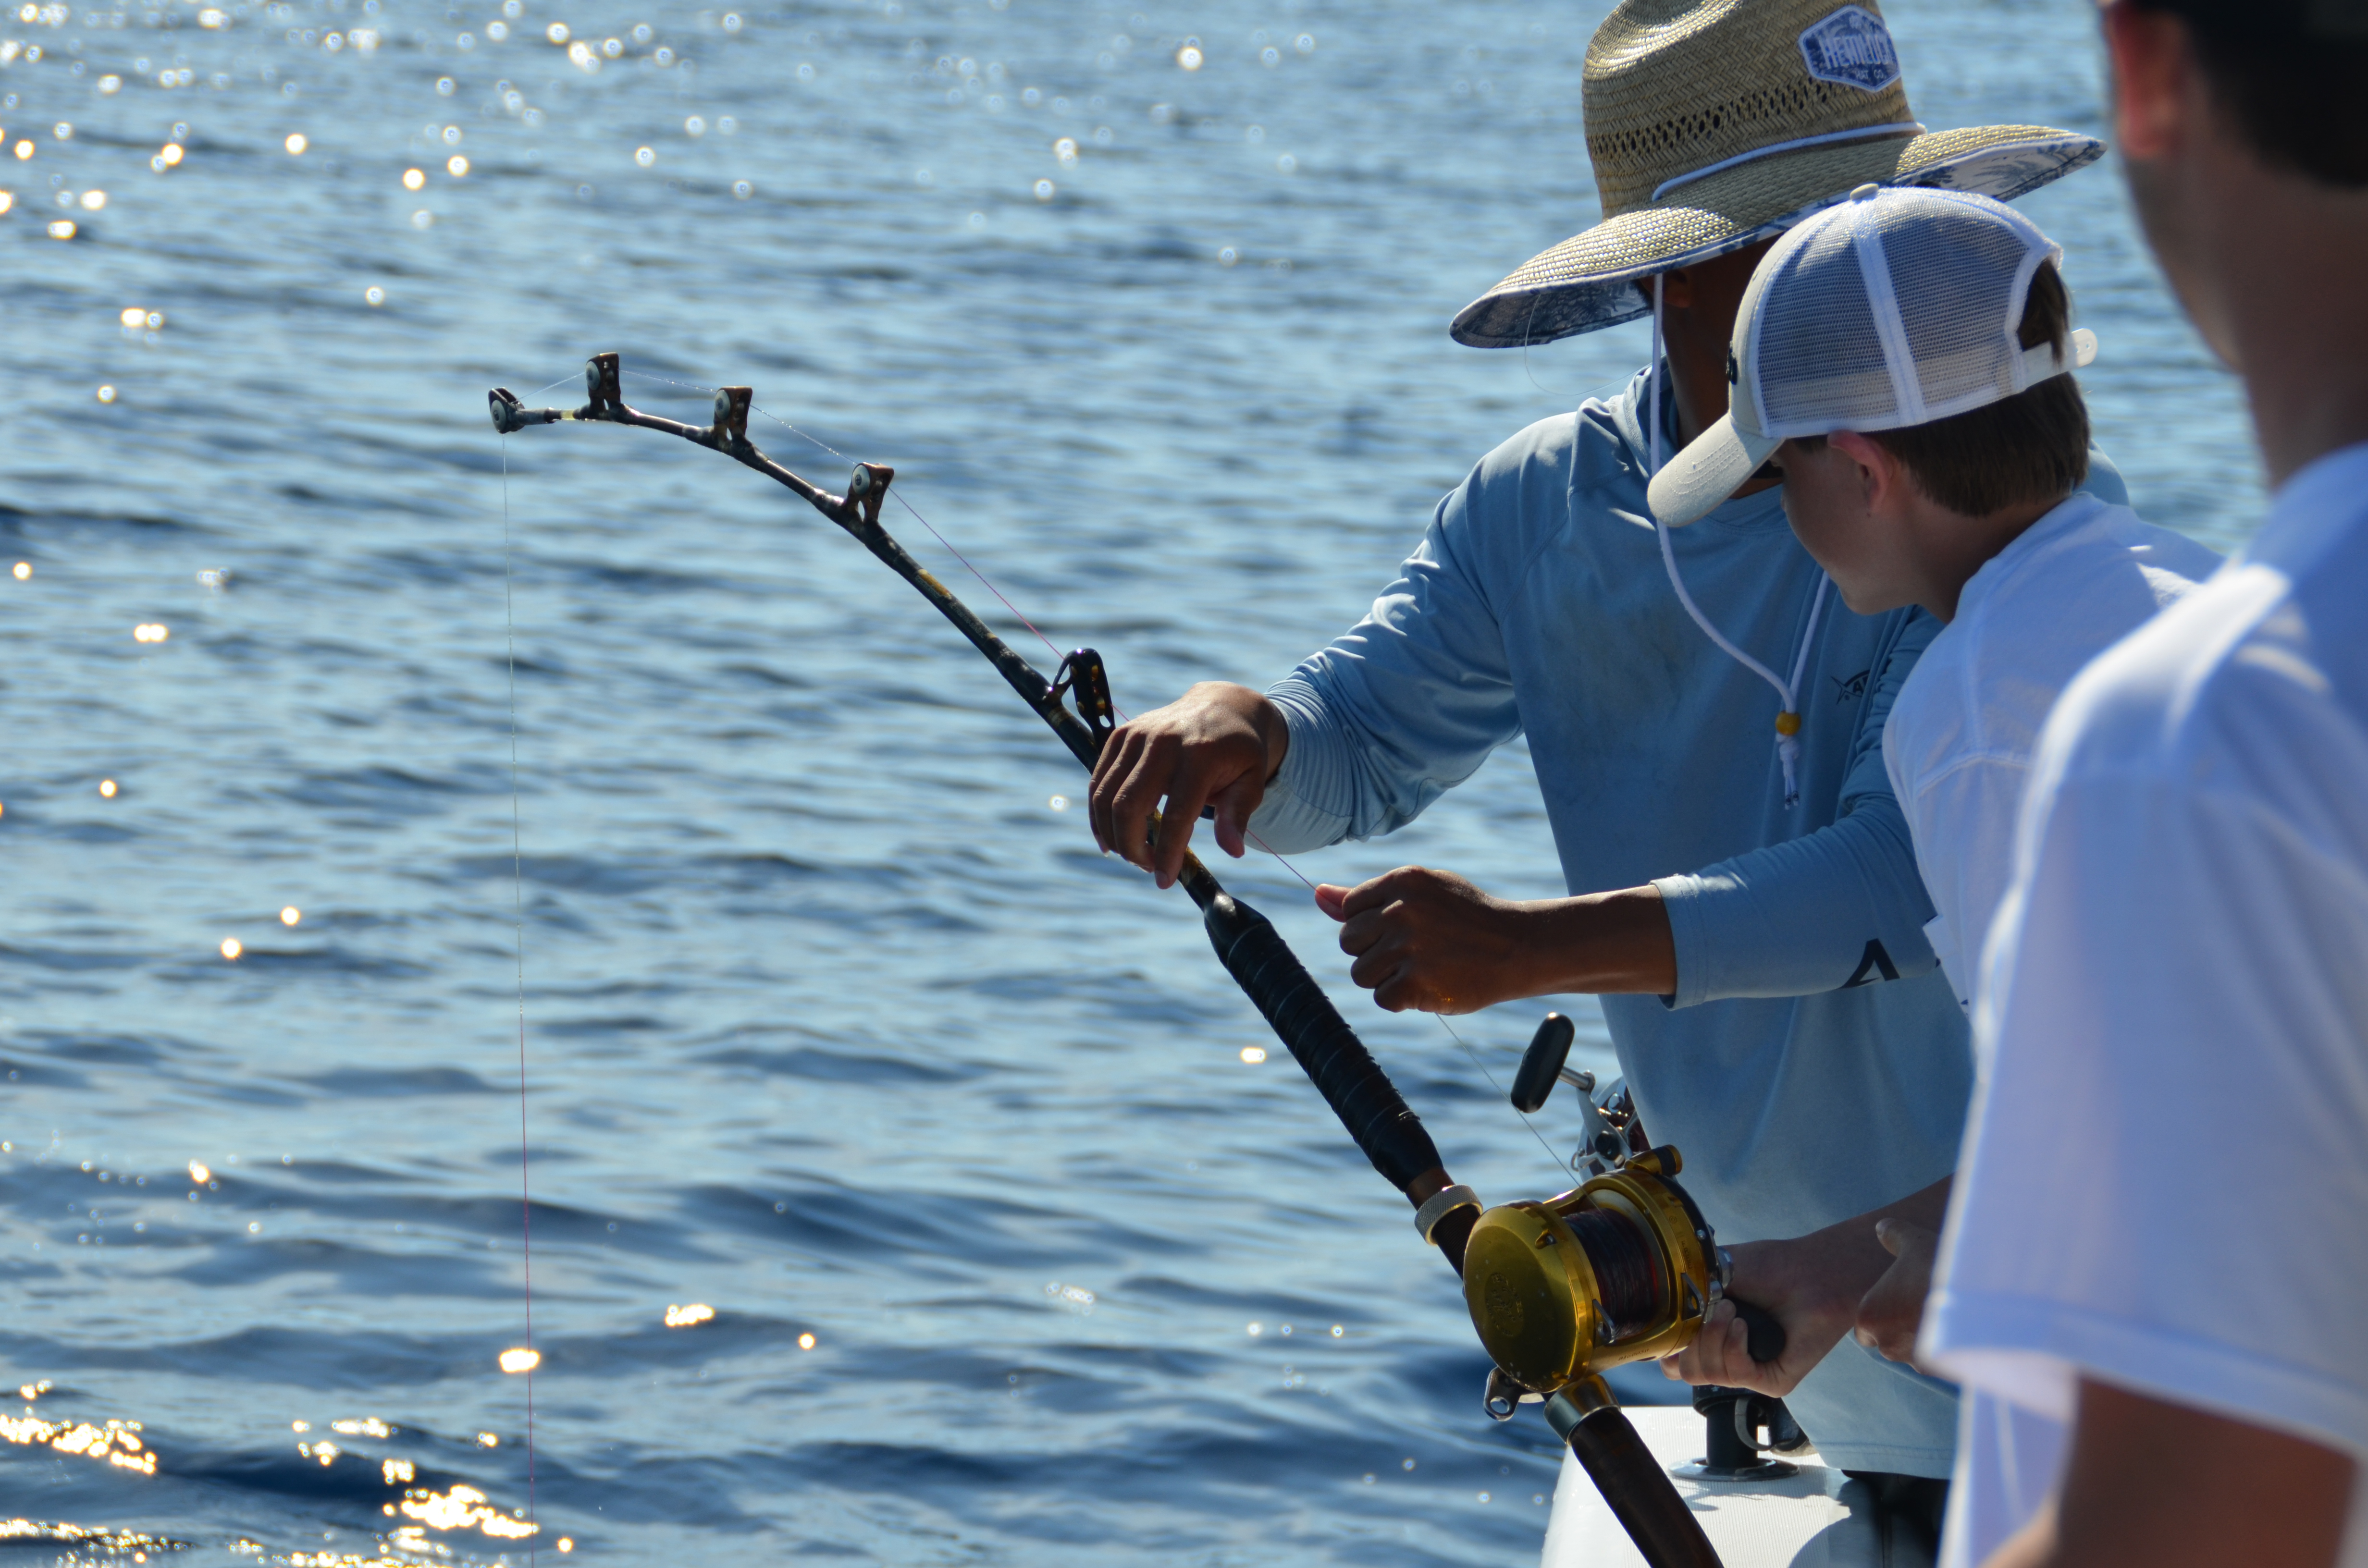 https://www.fisheries.noaa.gov/s3//2021-09/anglers%20fishing%20on%20boat%20gulf%20of%20mexico%204928x3264%20photo%20credit%20Return%20em%20Right.jpg